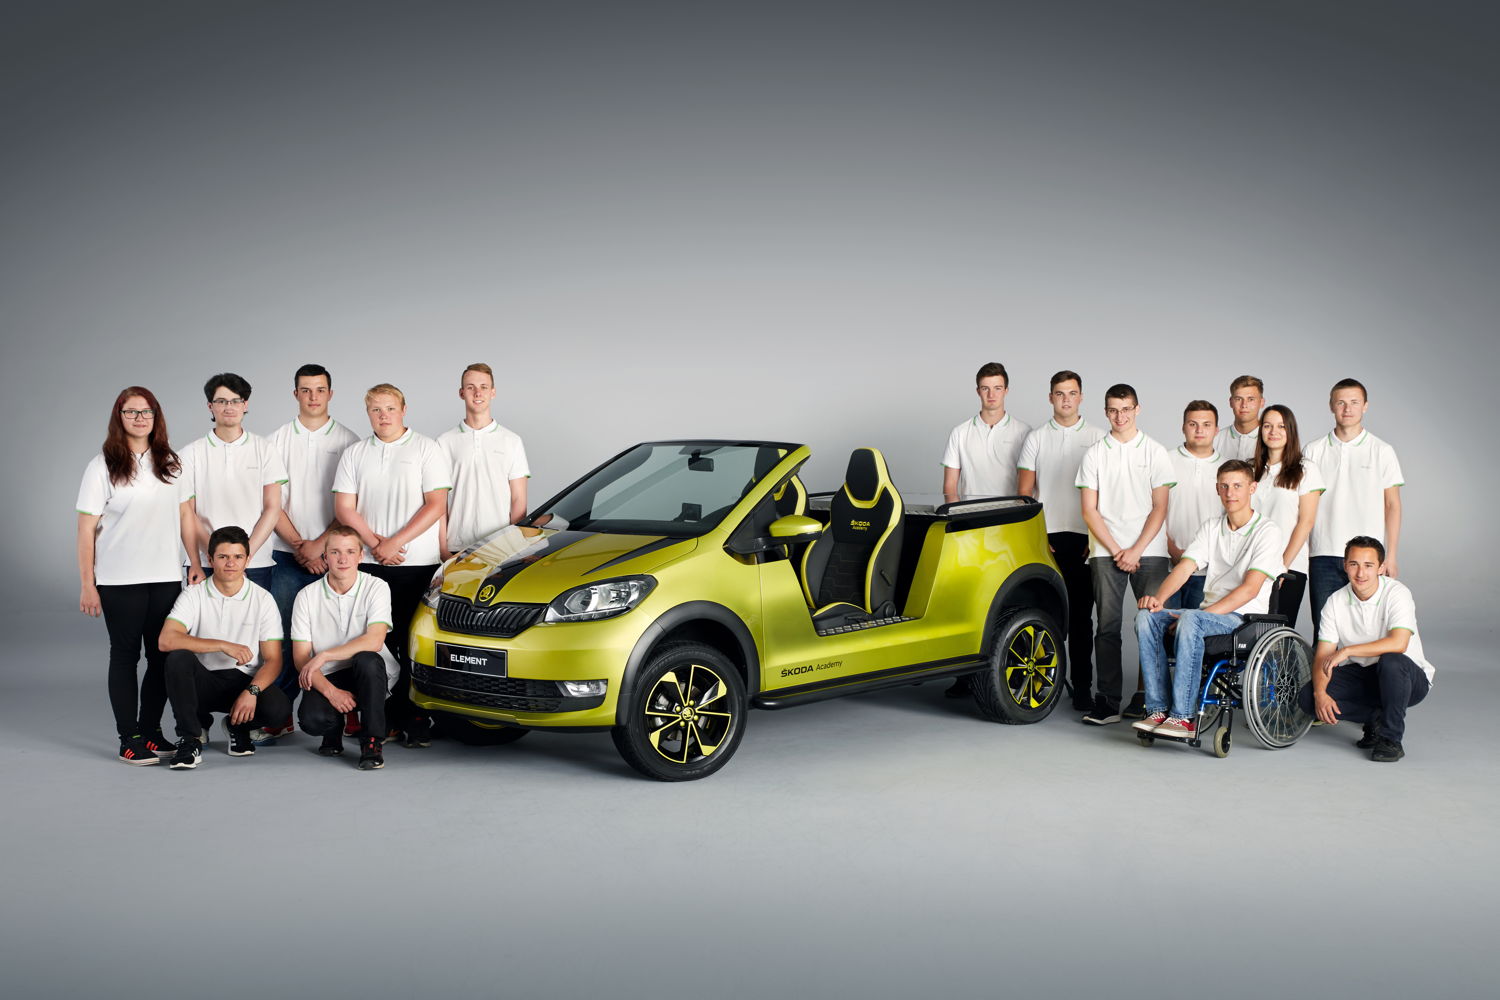 Following the three successful design studies from recent years, the students decided on an electric buggy that bears the name ŠKODA ELEMENT.